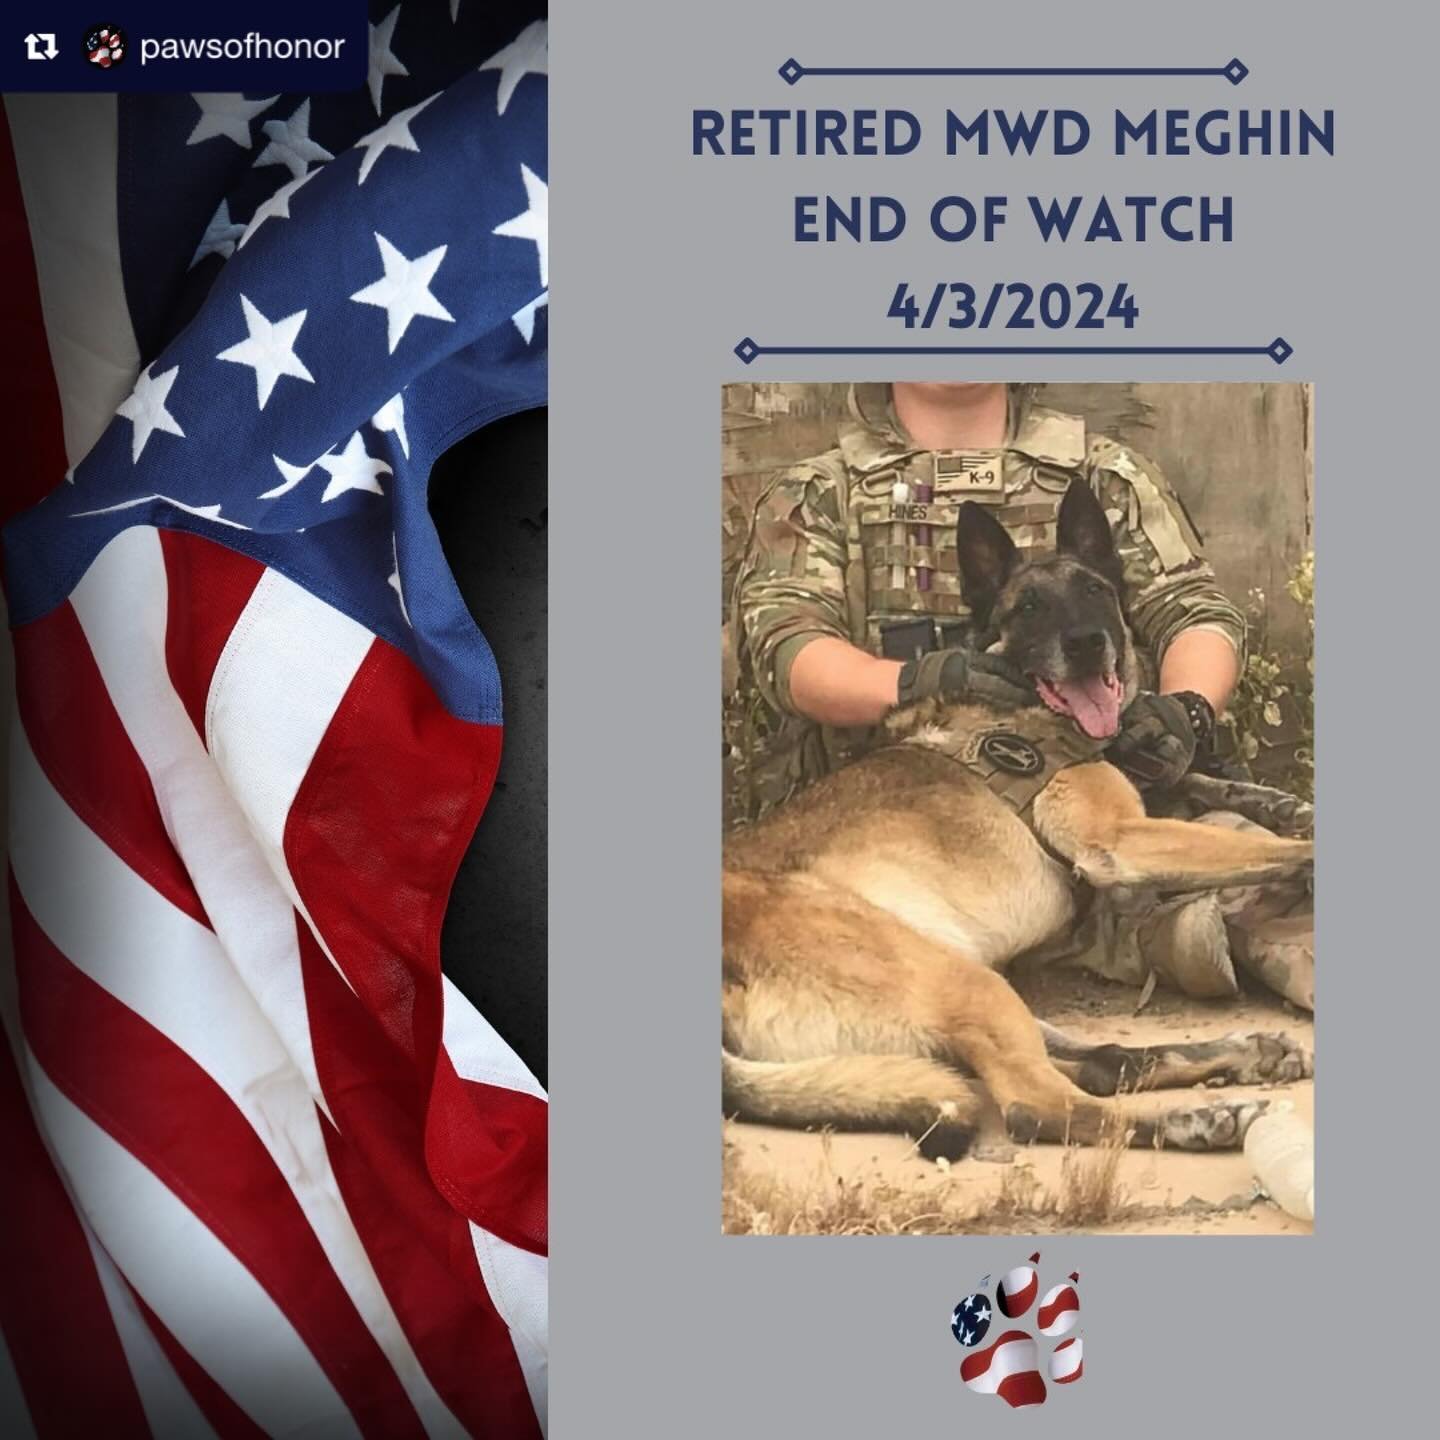 EOW MWD Meghin 🎖️

Remembering a hero today and everyday. Thank you for your loyal service Meghin. Our thoughts and prayers are with your handler and family.

To learn more about Meghin&rsquo;s heroic service to our country see POH&rsquo;s post belo